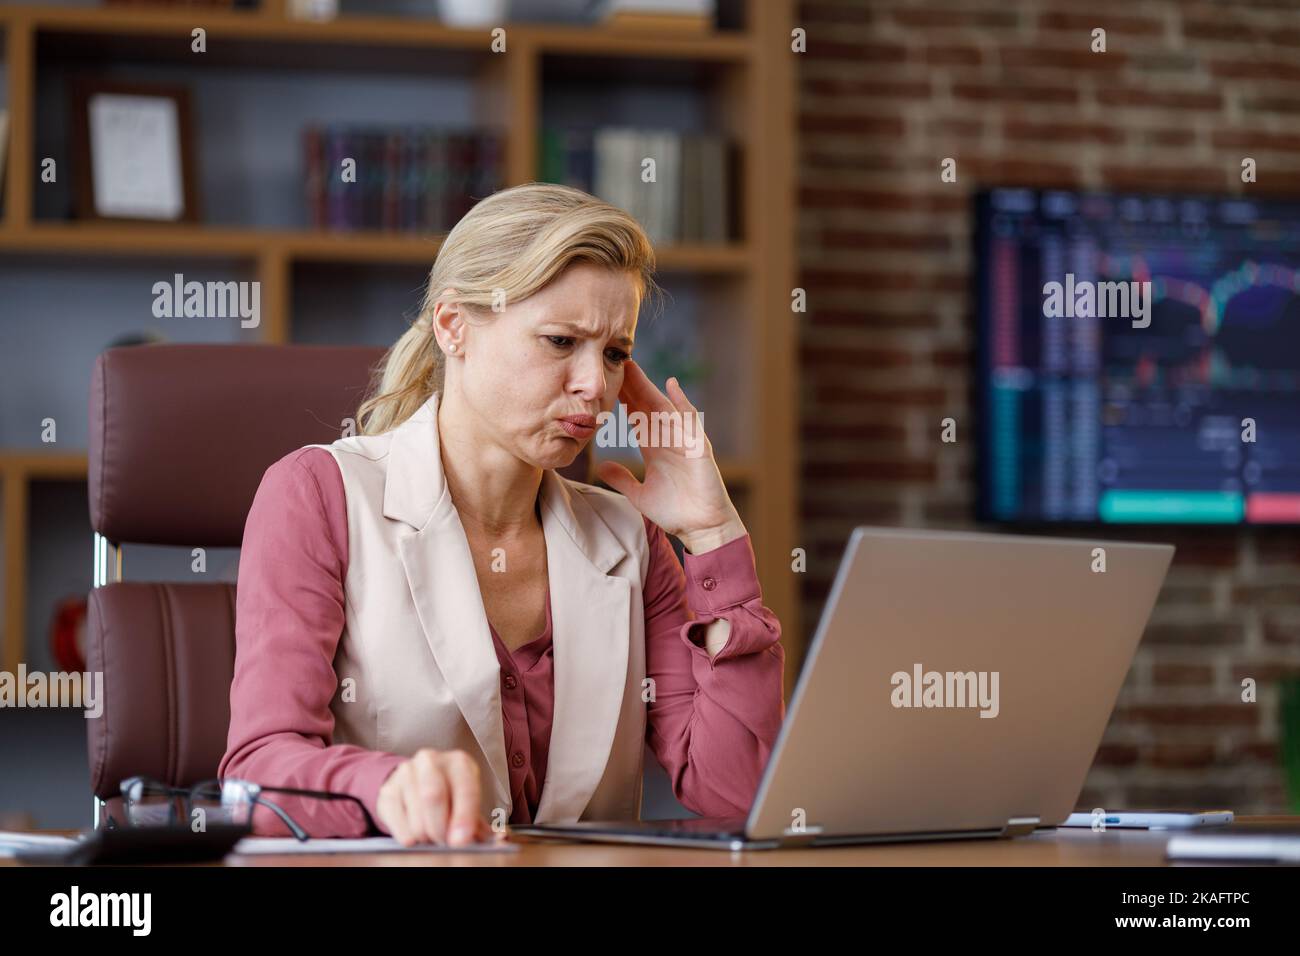 Stressed female trader desperate about losing money analyzing stock exchange market. Tired businesswoman recieved bad online news. Financial crisis Stock Photo